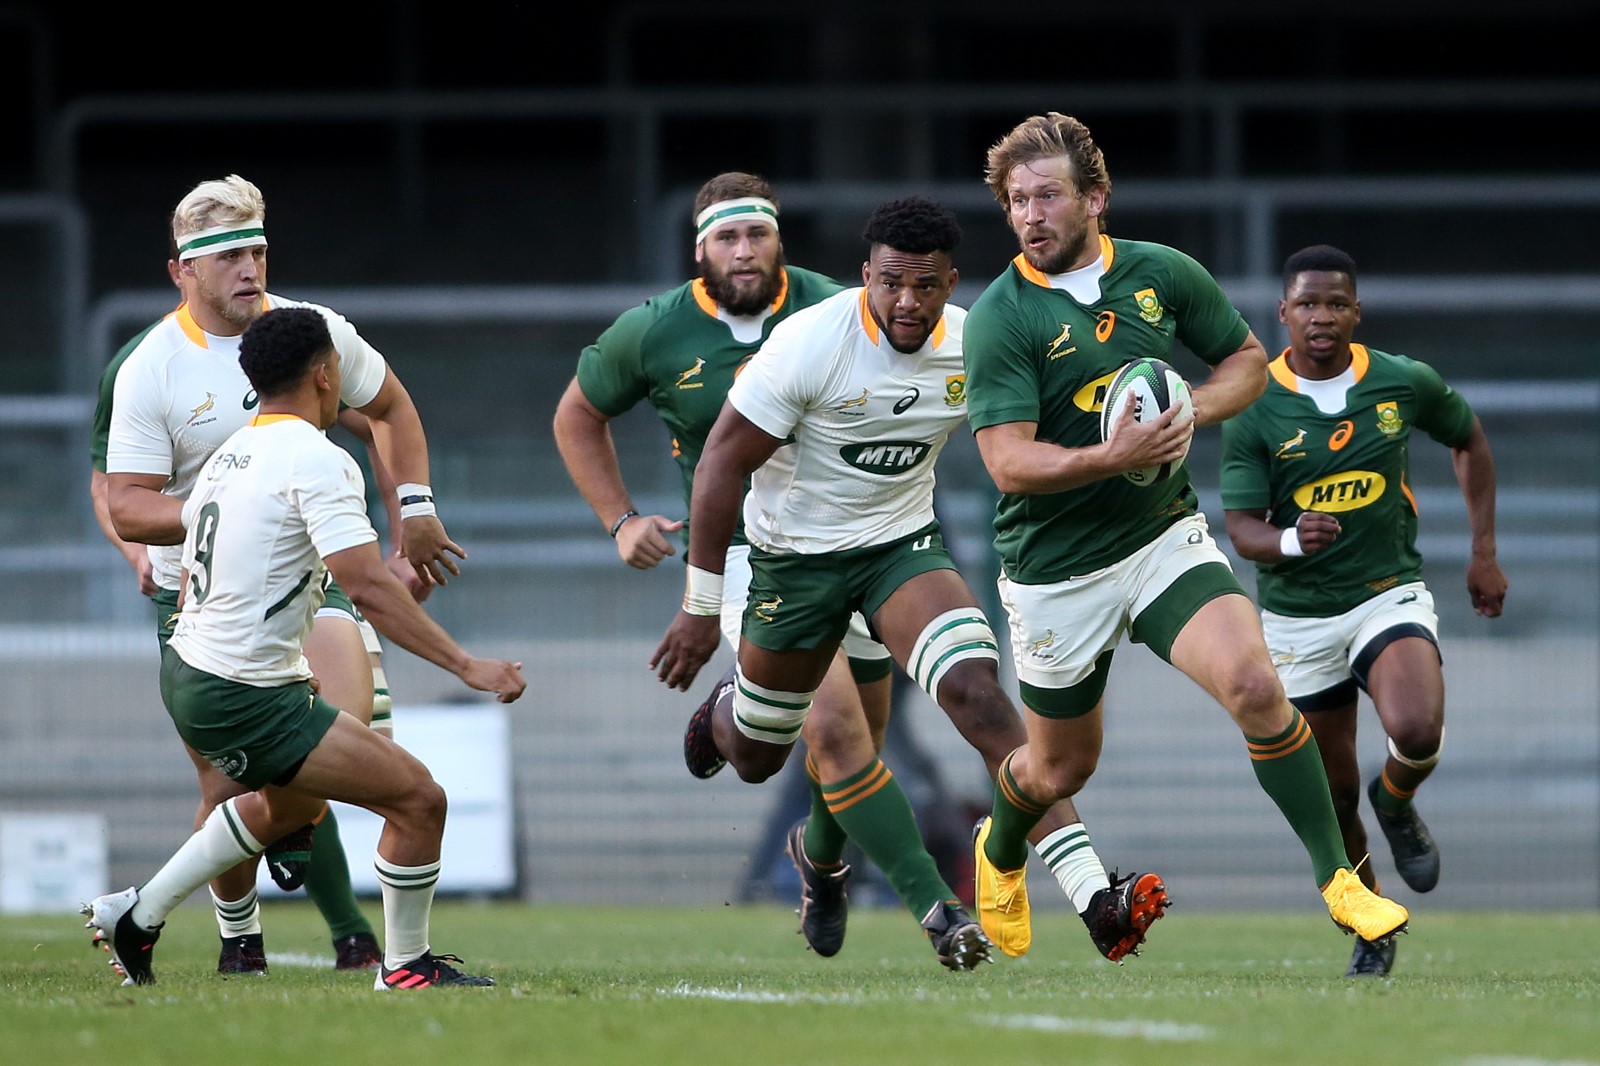 Frans Steyn on the attack.